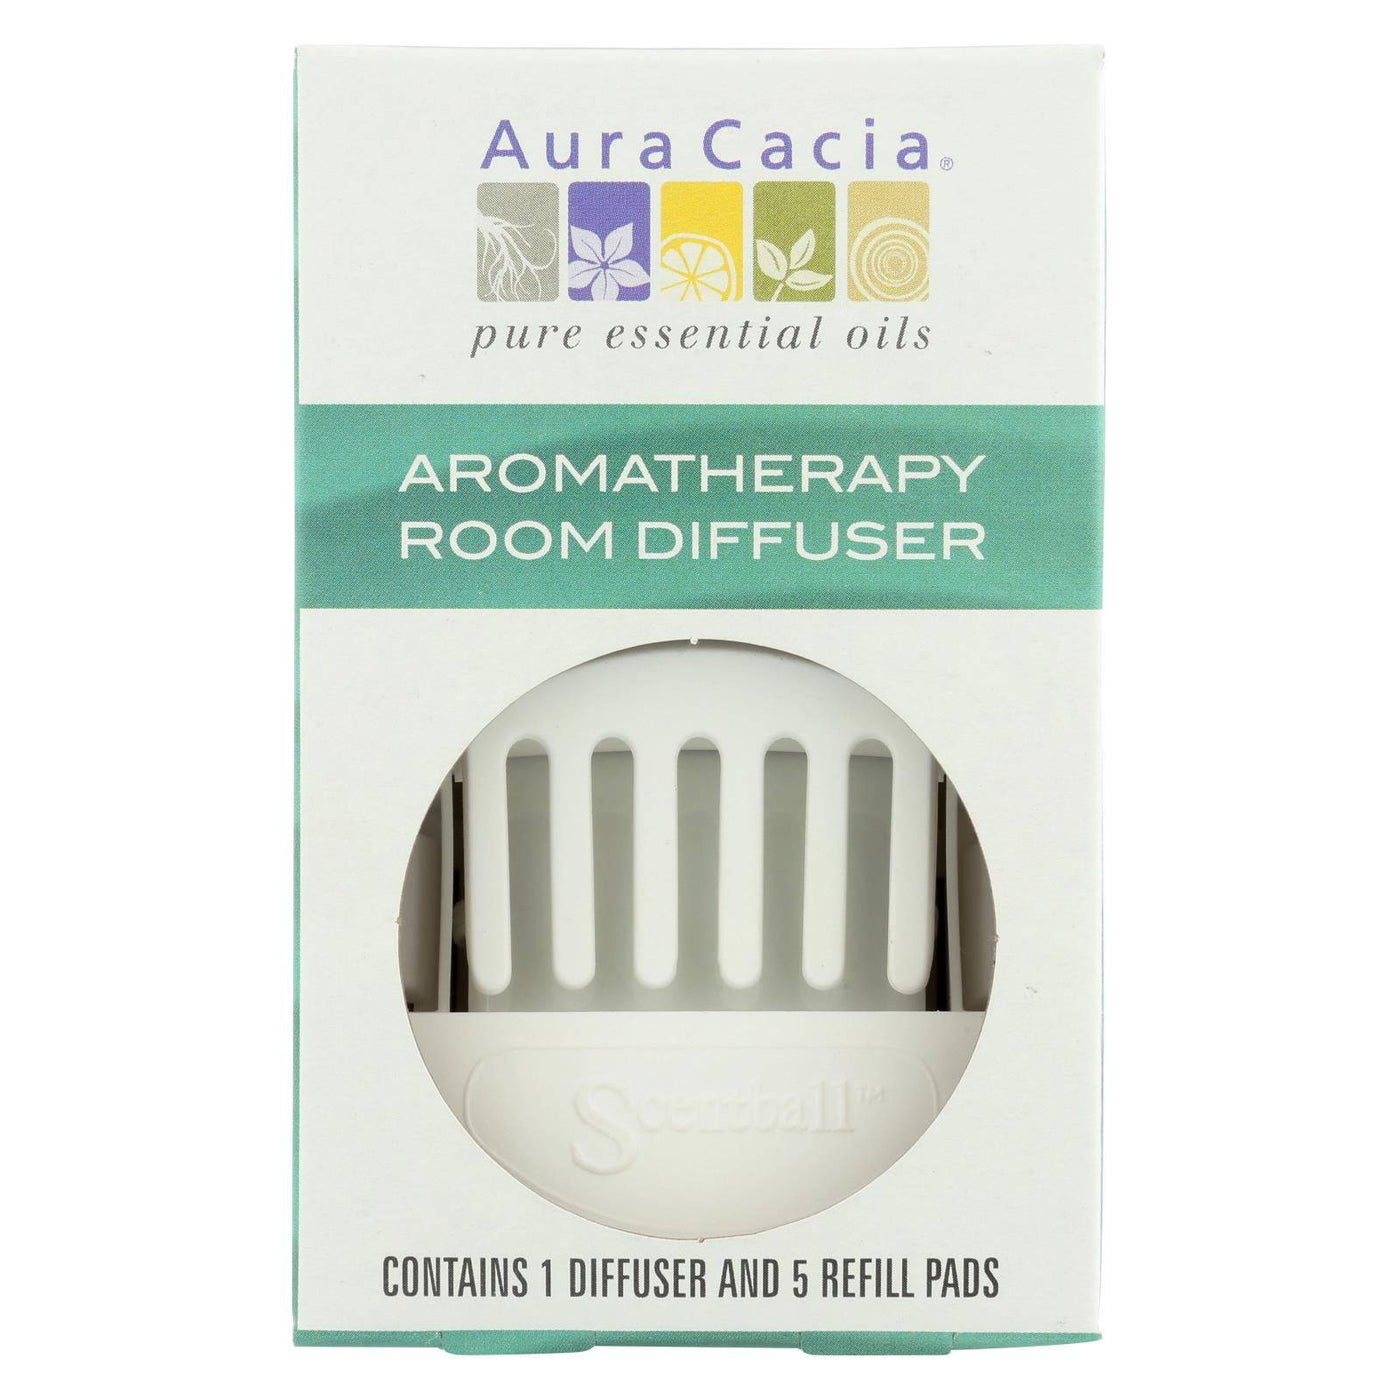 Aura Cacia - Aromatherapy Room Diffuser - 1 Diffuser | OnlyNaturals.us